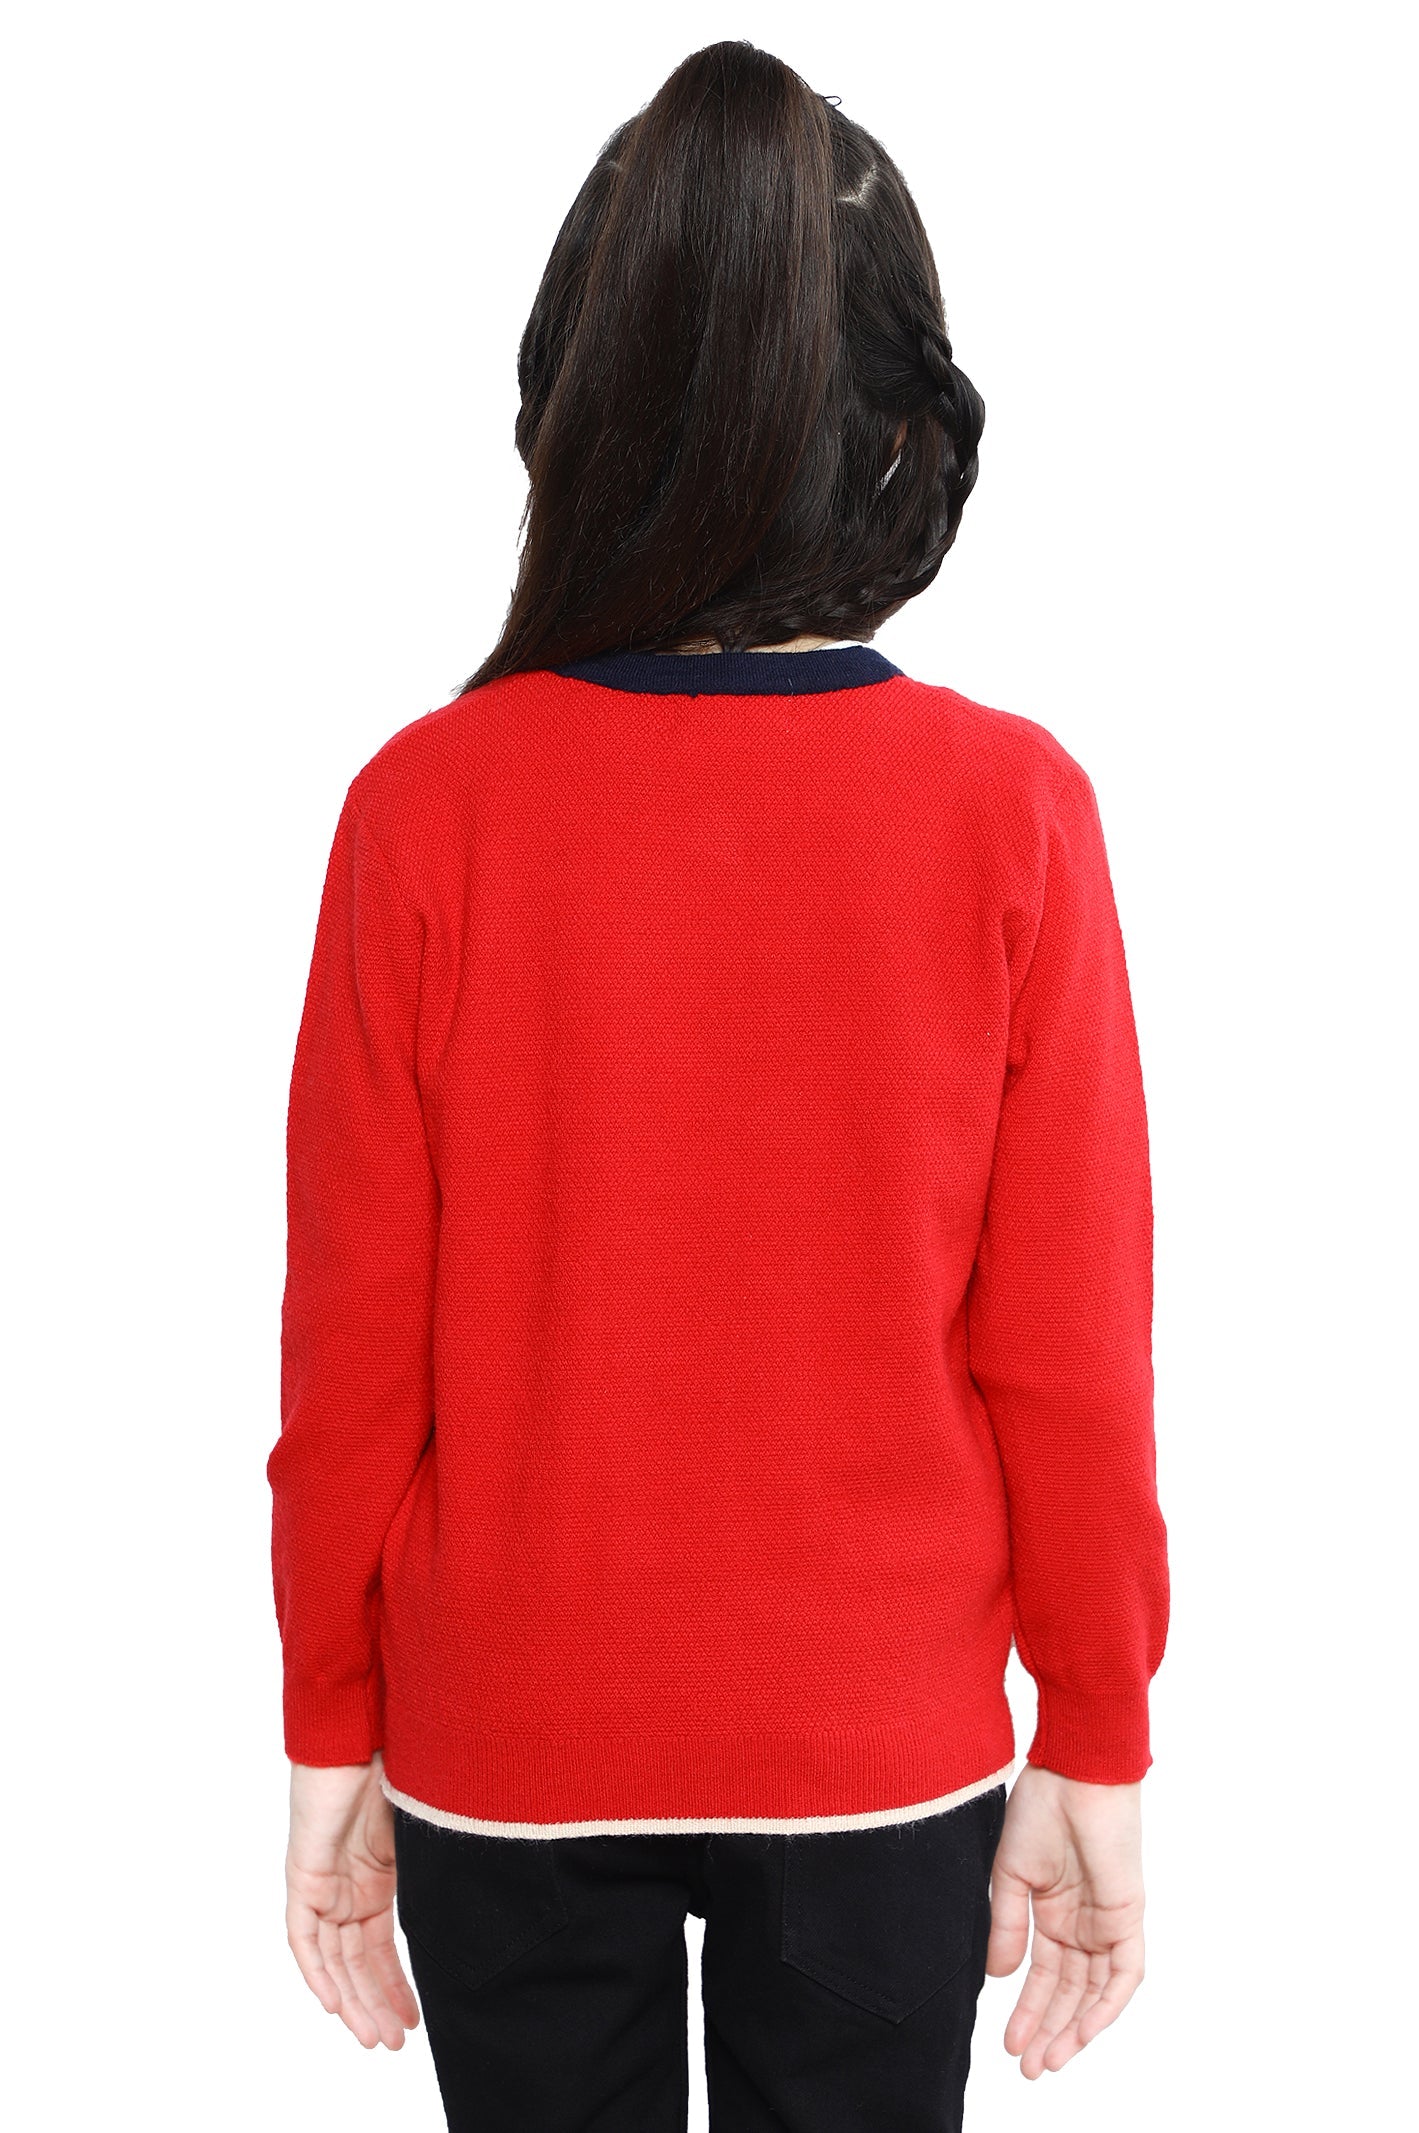 Girls Sweater SKU: KGE-0156-RED - Diners